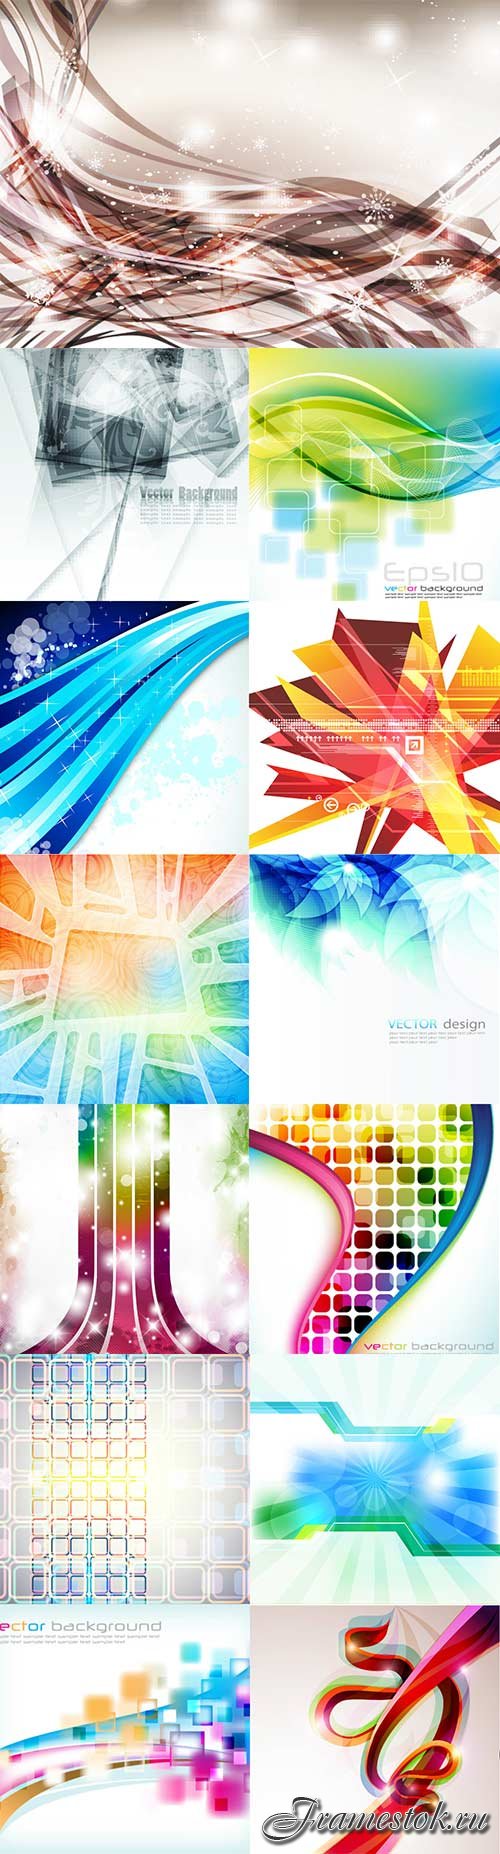 Bright colorful abstract backgrounds vector - 63